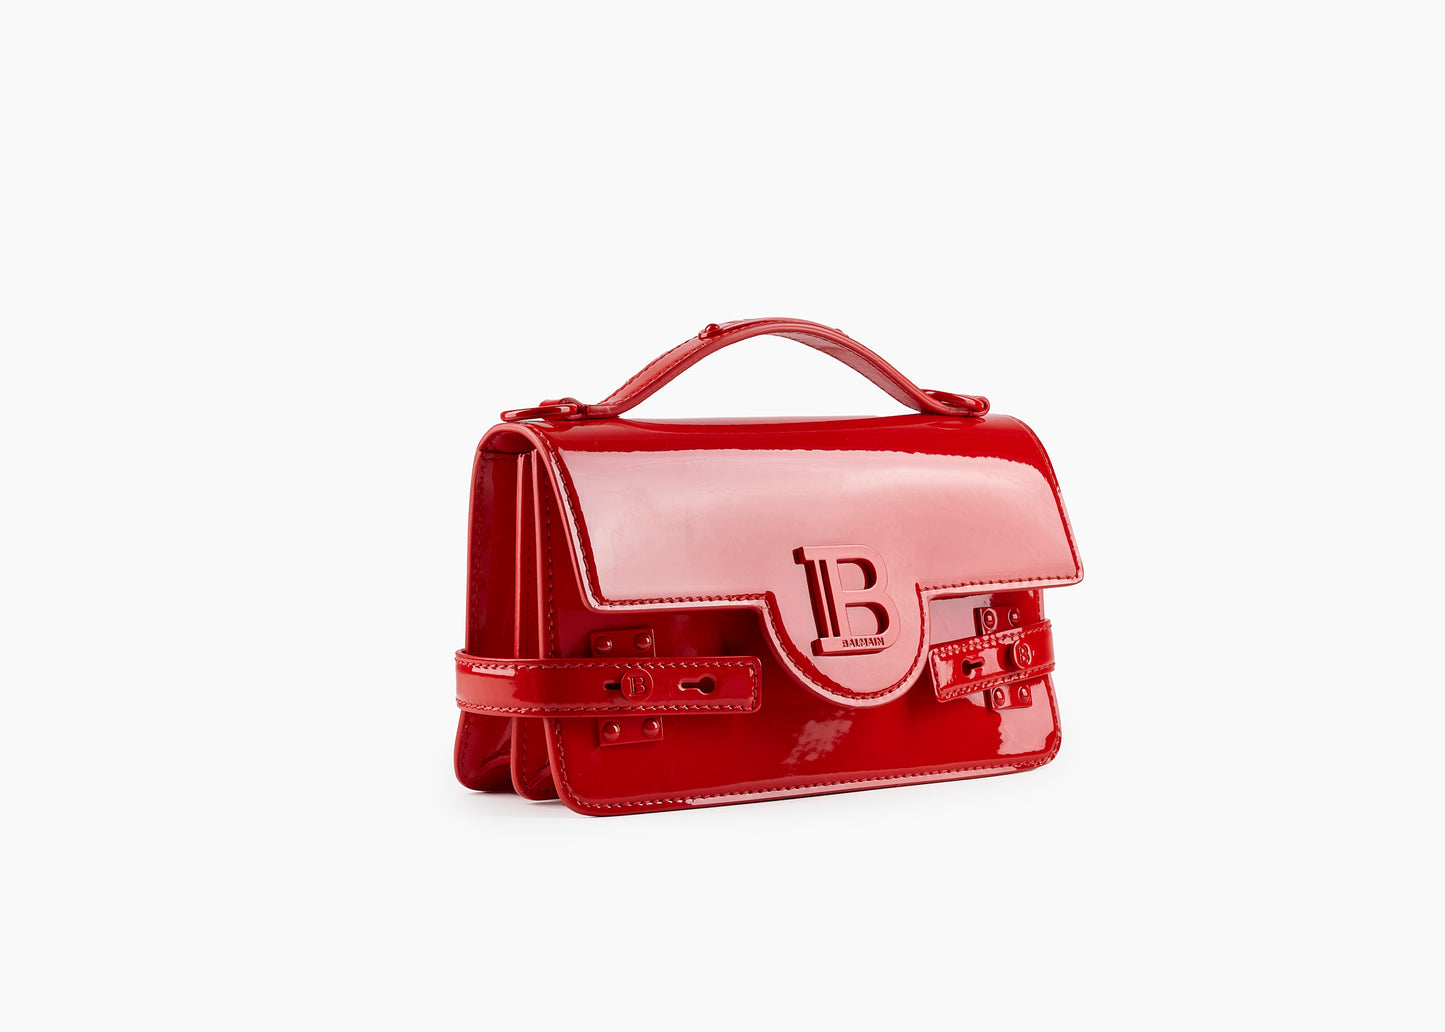 B-Buzz 24 Shoulder Bag Patent Leather Red